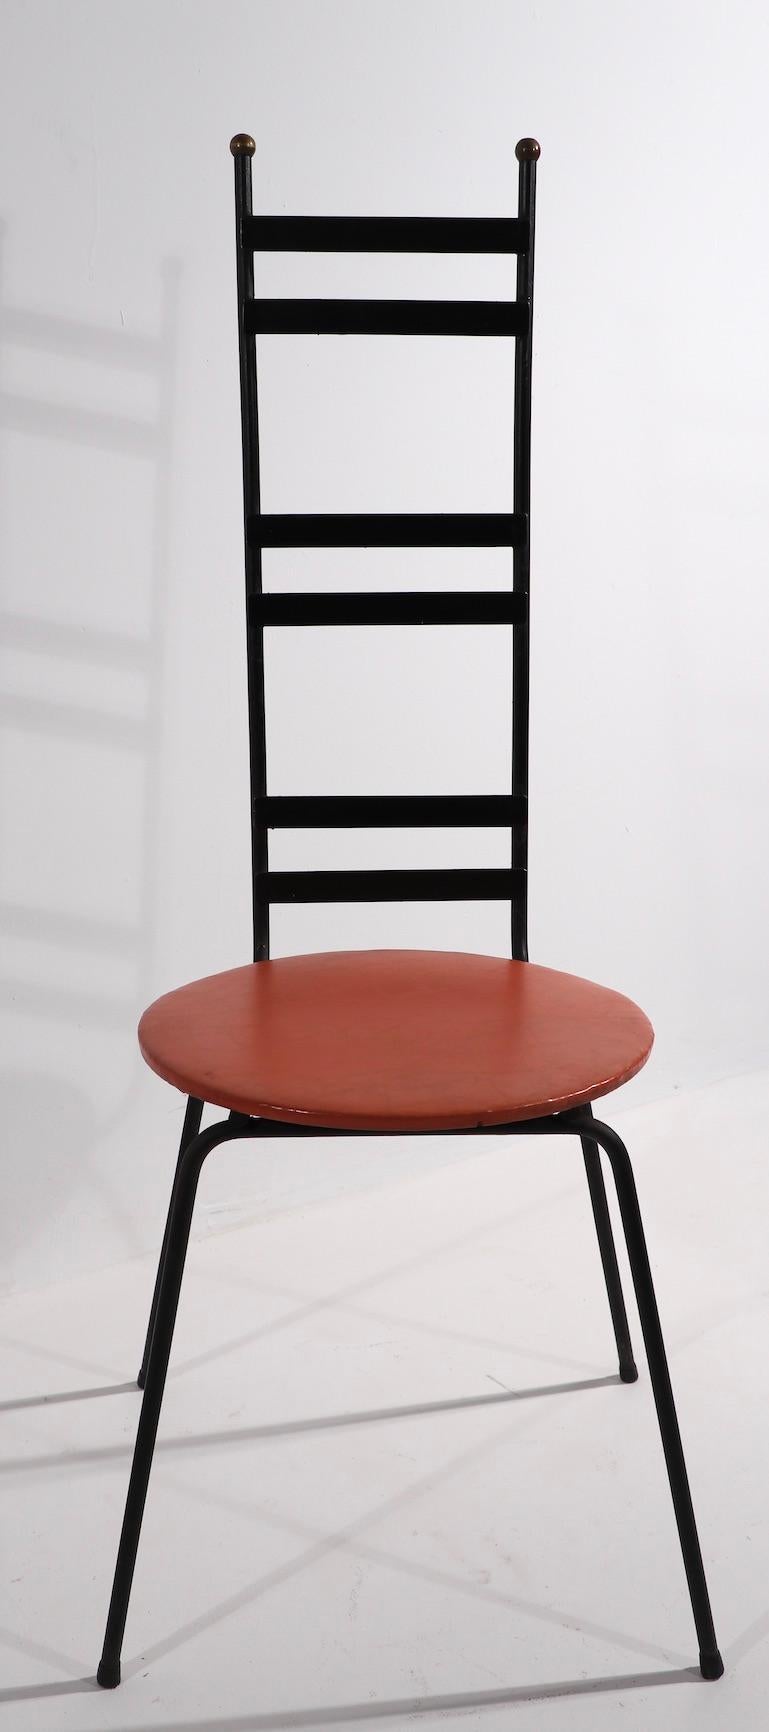 American Set of 4 High Ladder Back Iron Chairs by Umanoff